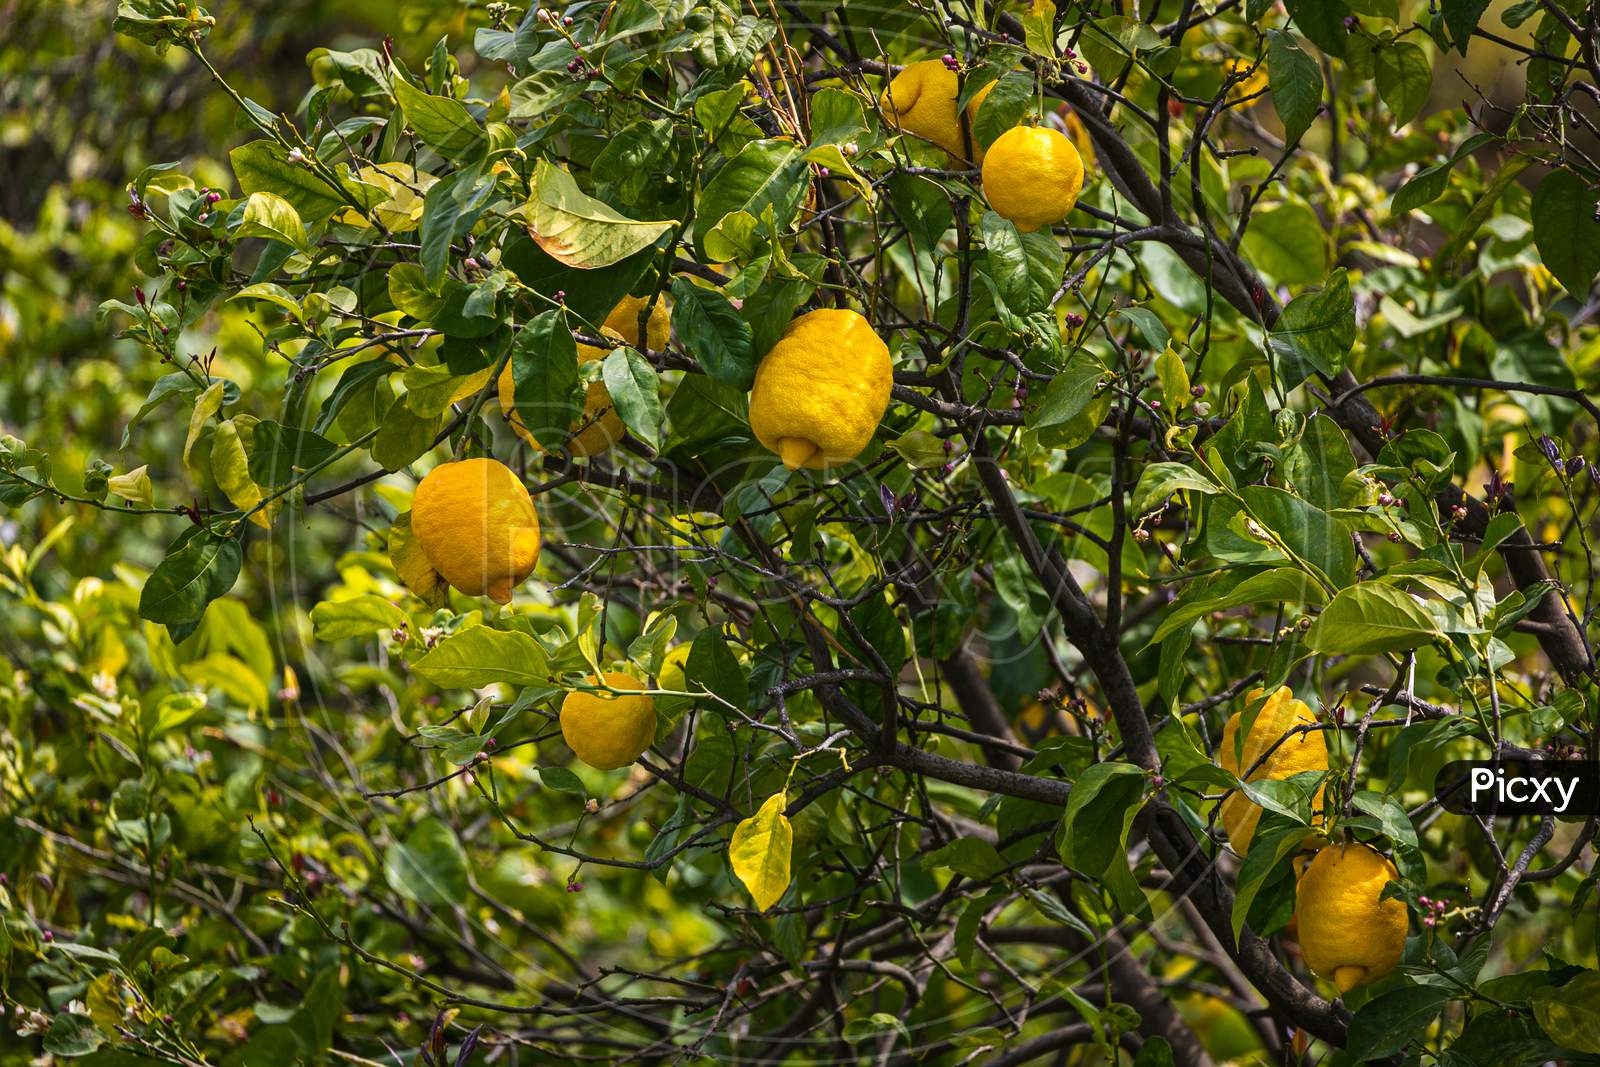 Close-Up Beautiful  Tree With Yellow  Large Lemon  Surrounded By Many Bright Green Leaves, Soft Focus